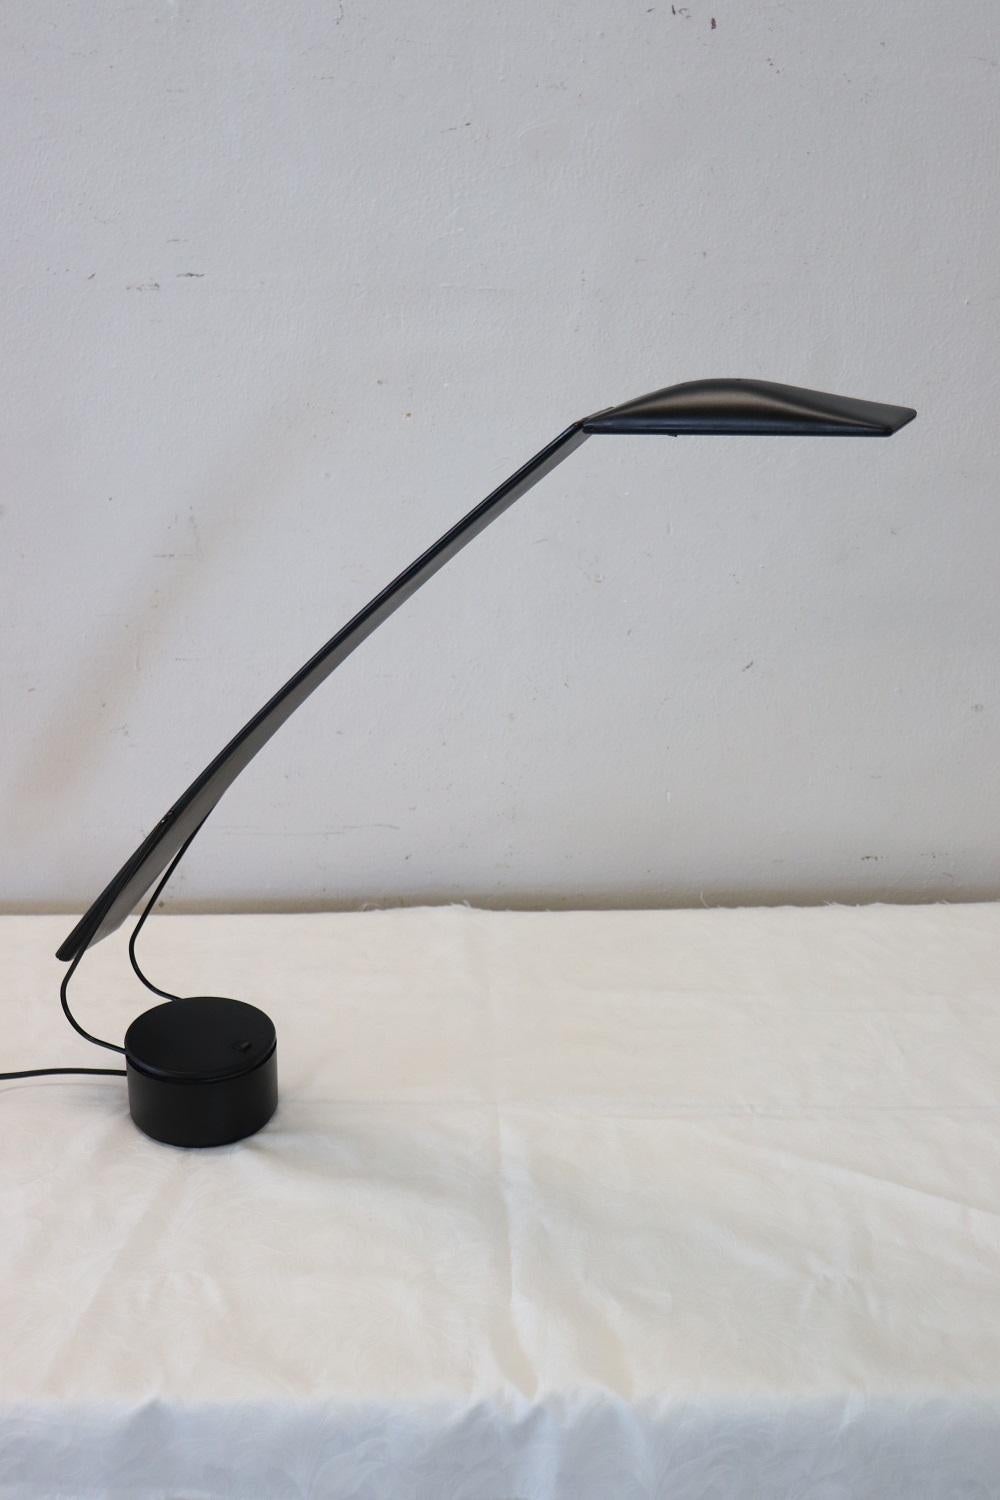 Italian Design adjustable table or desk lamp. PAF studio (Milan) Dove model lamp by Mario Barbaglia and Marco Colombo, 1980s. Plastic structure with metal supports, height adjustable, on swivel base. Halogen lamp with switch on the base.
In